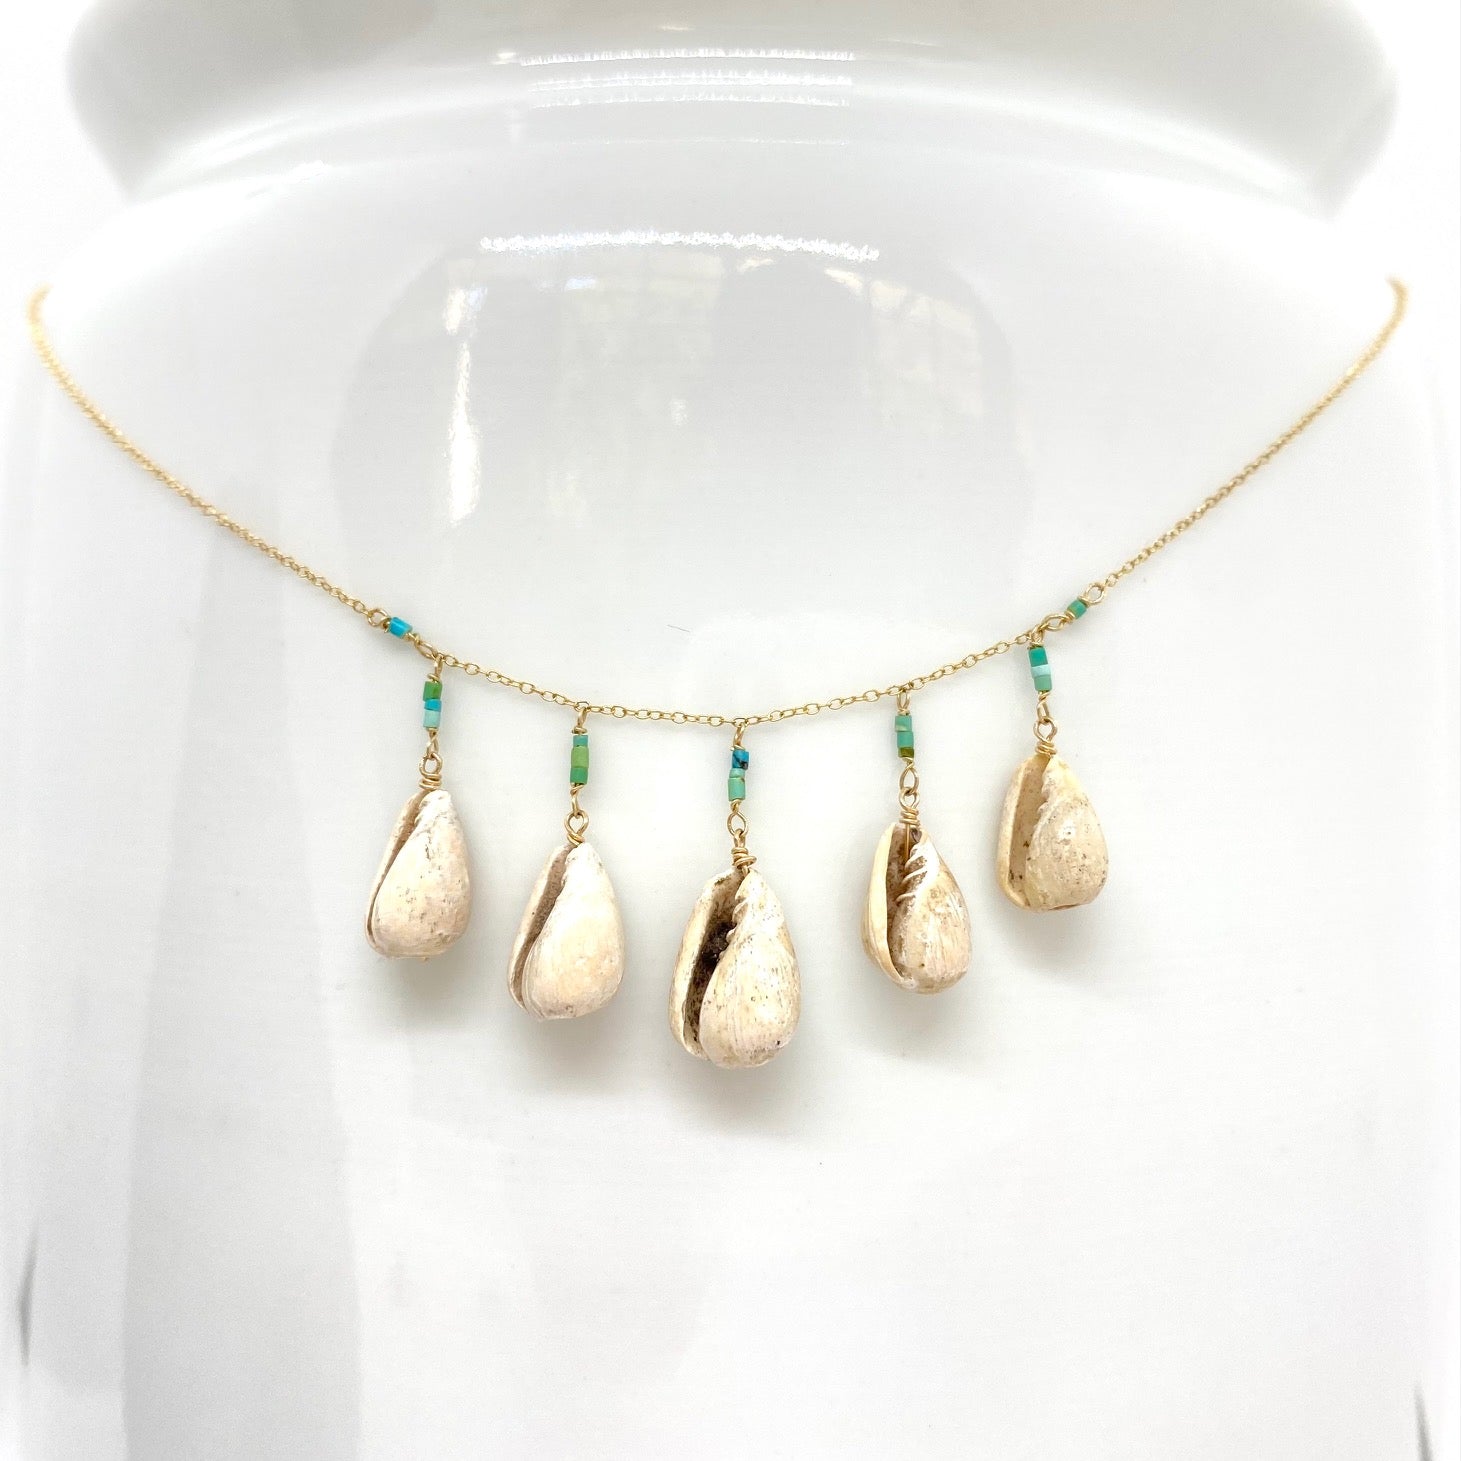 14k Gold Chain Necklace w/ Pre-Columbian Shells & Afghan Turquoise